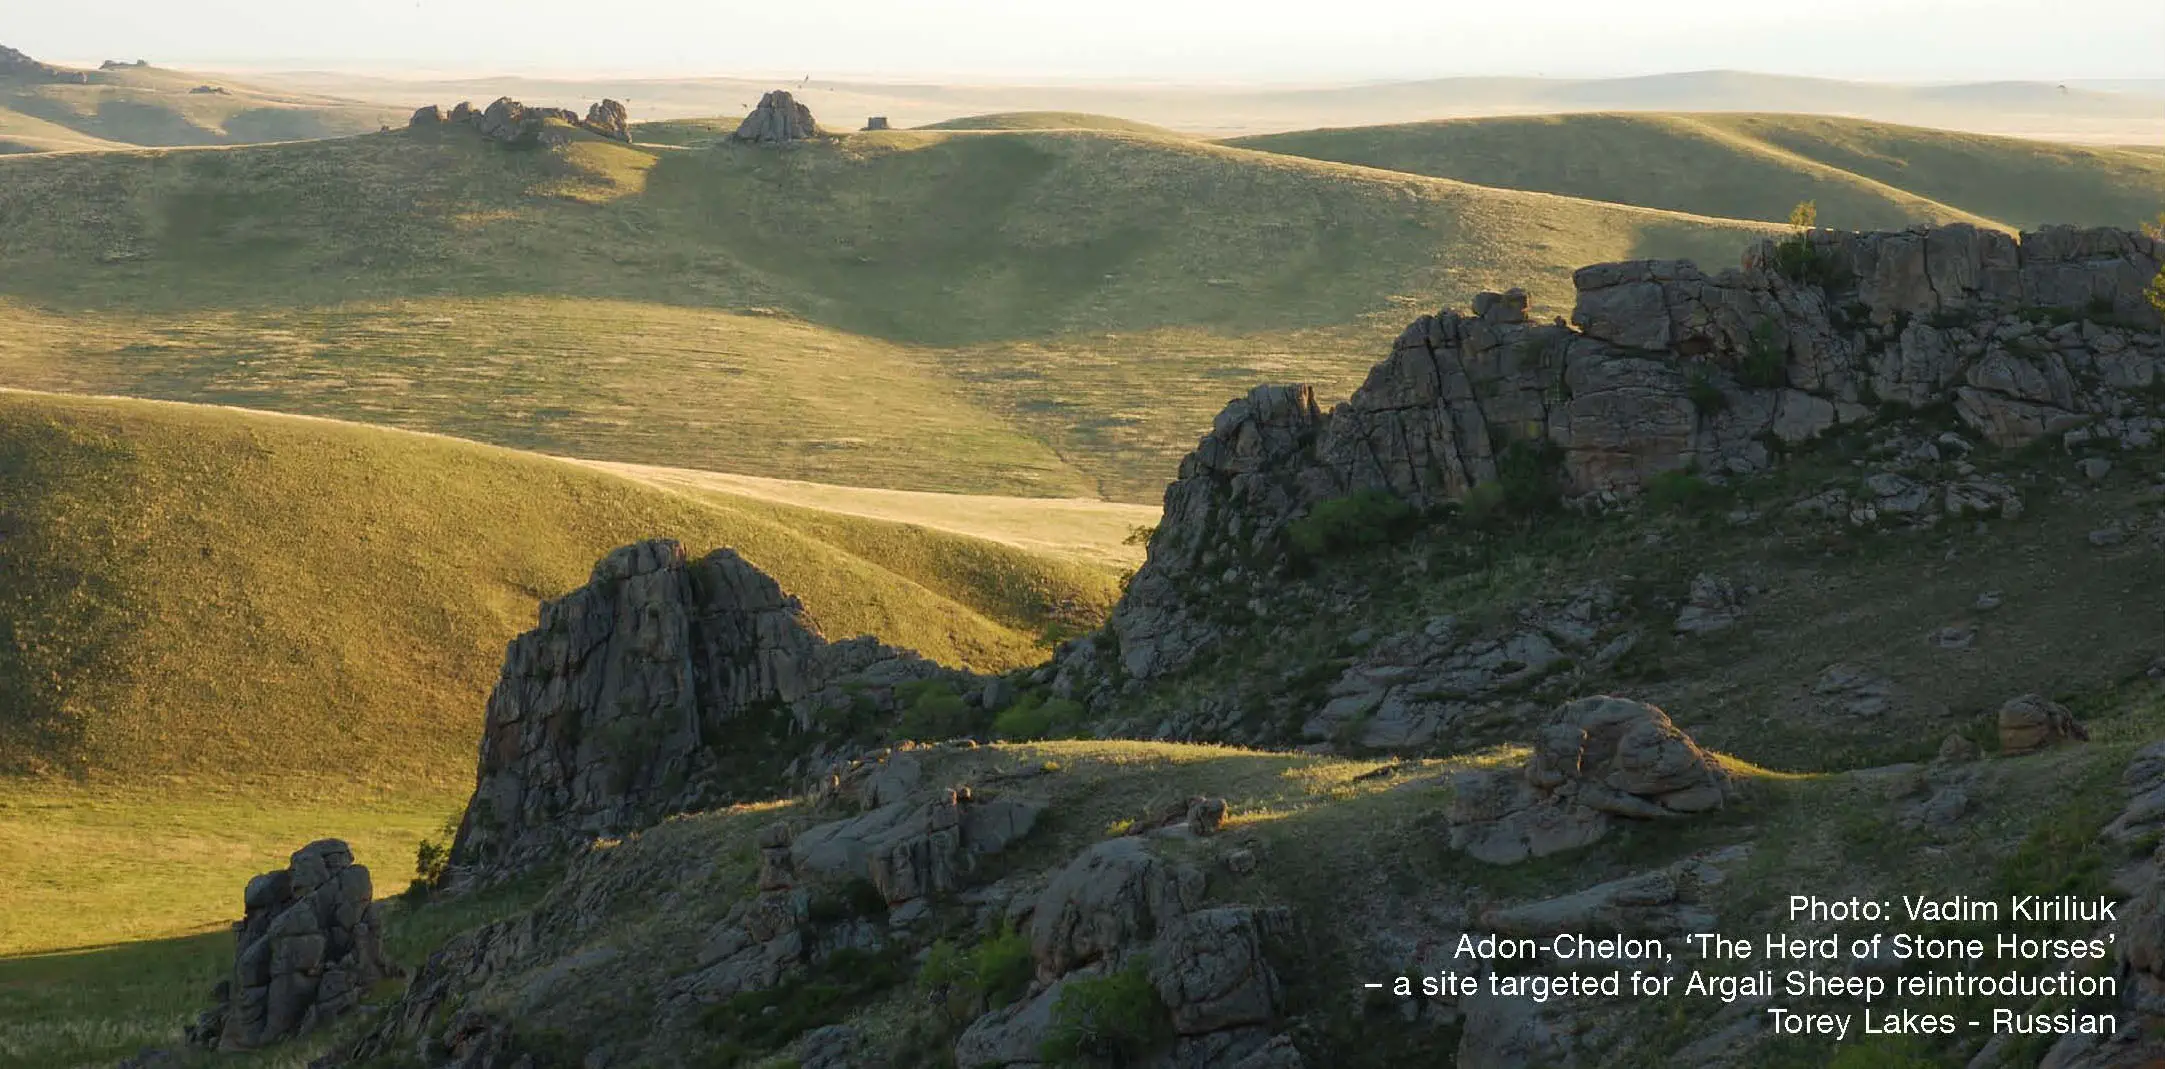 Adon-Chelon, "The herd of stone horses" a site targeted for Argali Sheep reintroduction Torey Lakes - Russian